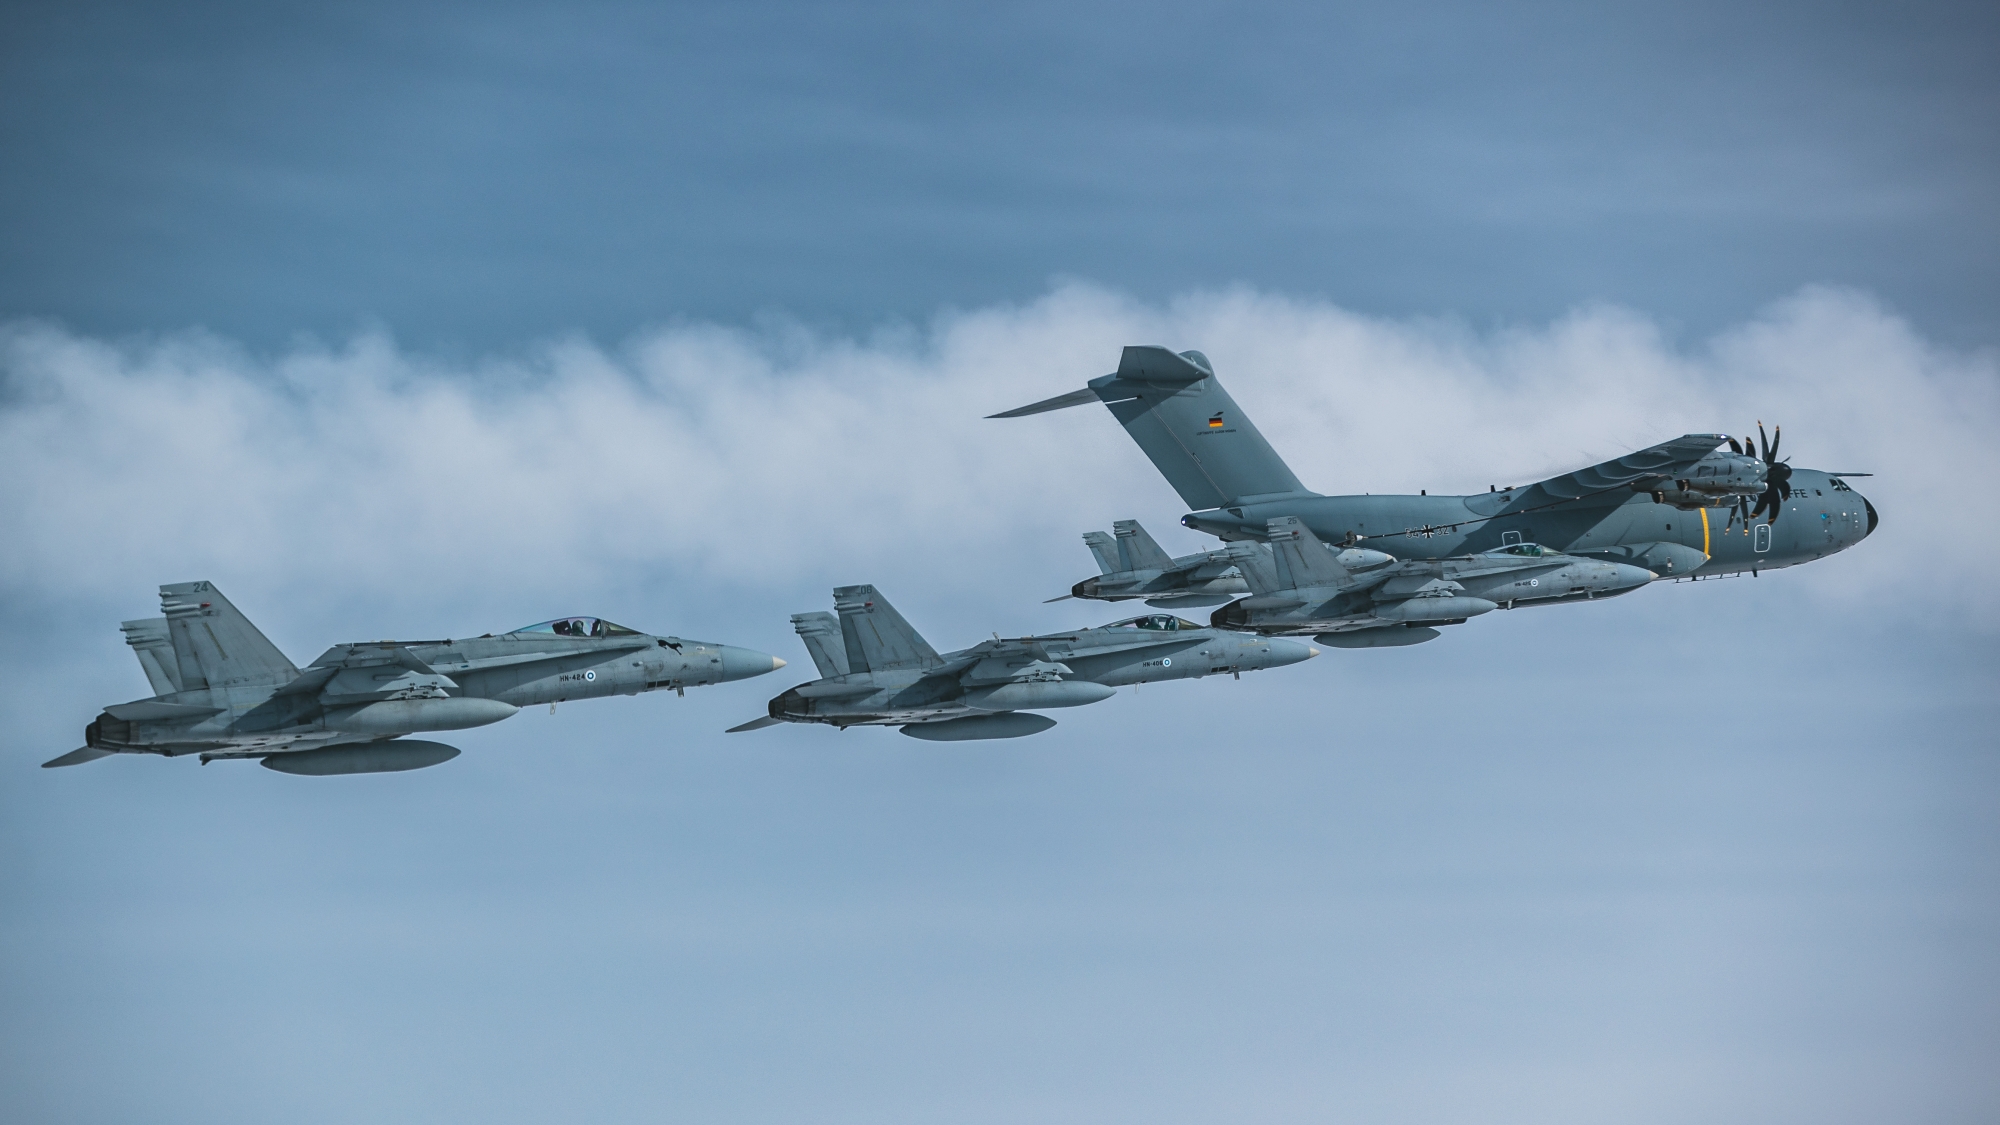 Four Finnish F/A-18 Hornets and a German A400M